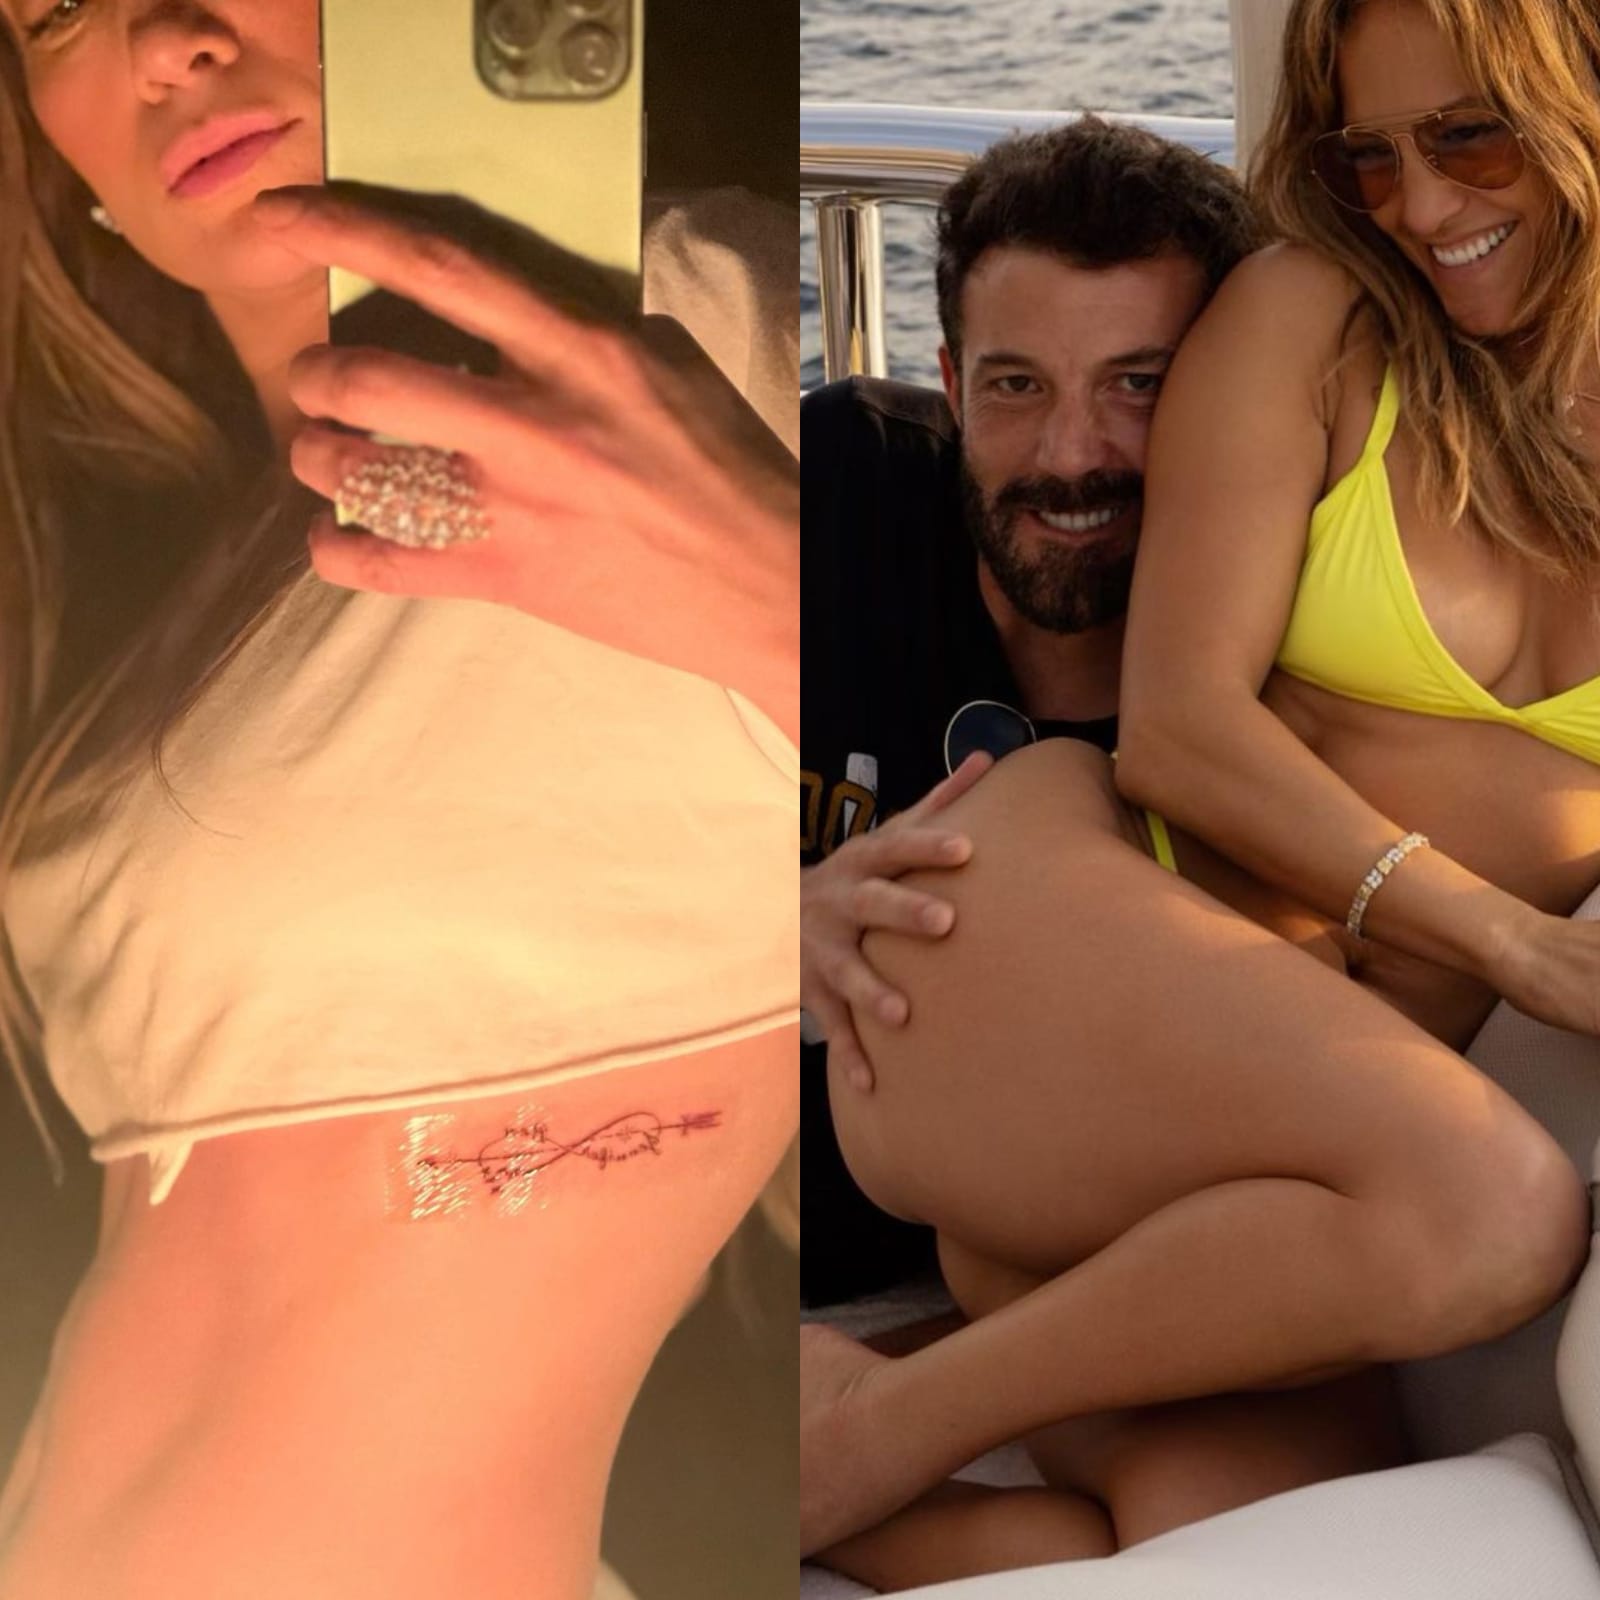 Jennifer Lopez Gets Underboob Tattoo Honouring Her Love For Ben Affleck, Shares Sexy Pics With Hubby